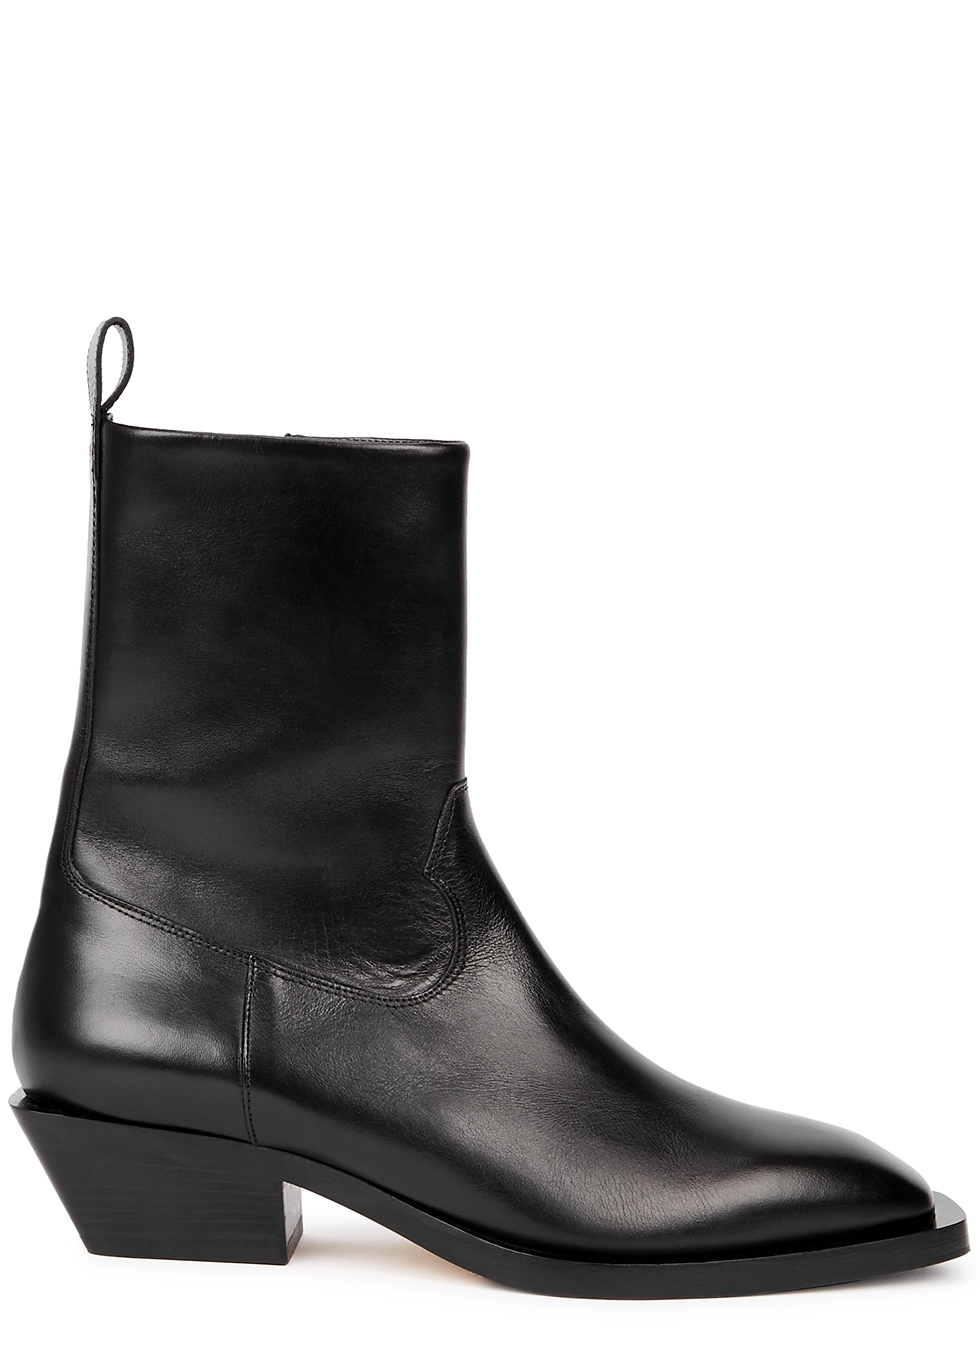 aeyde Luis 40 black leather ankle boots - Harvey Nichols